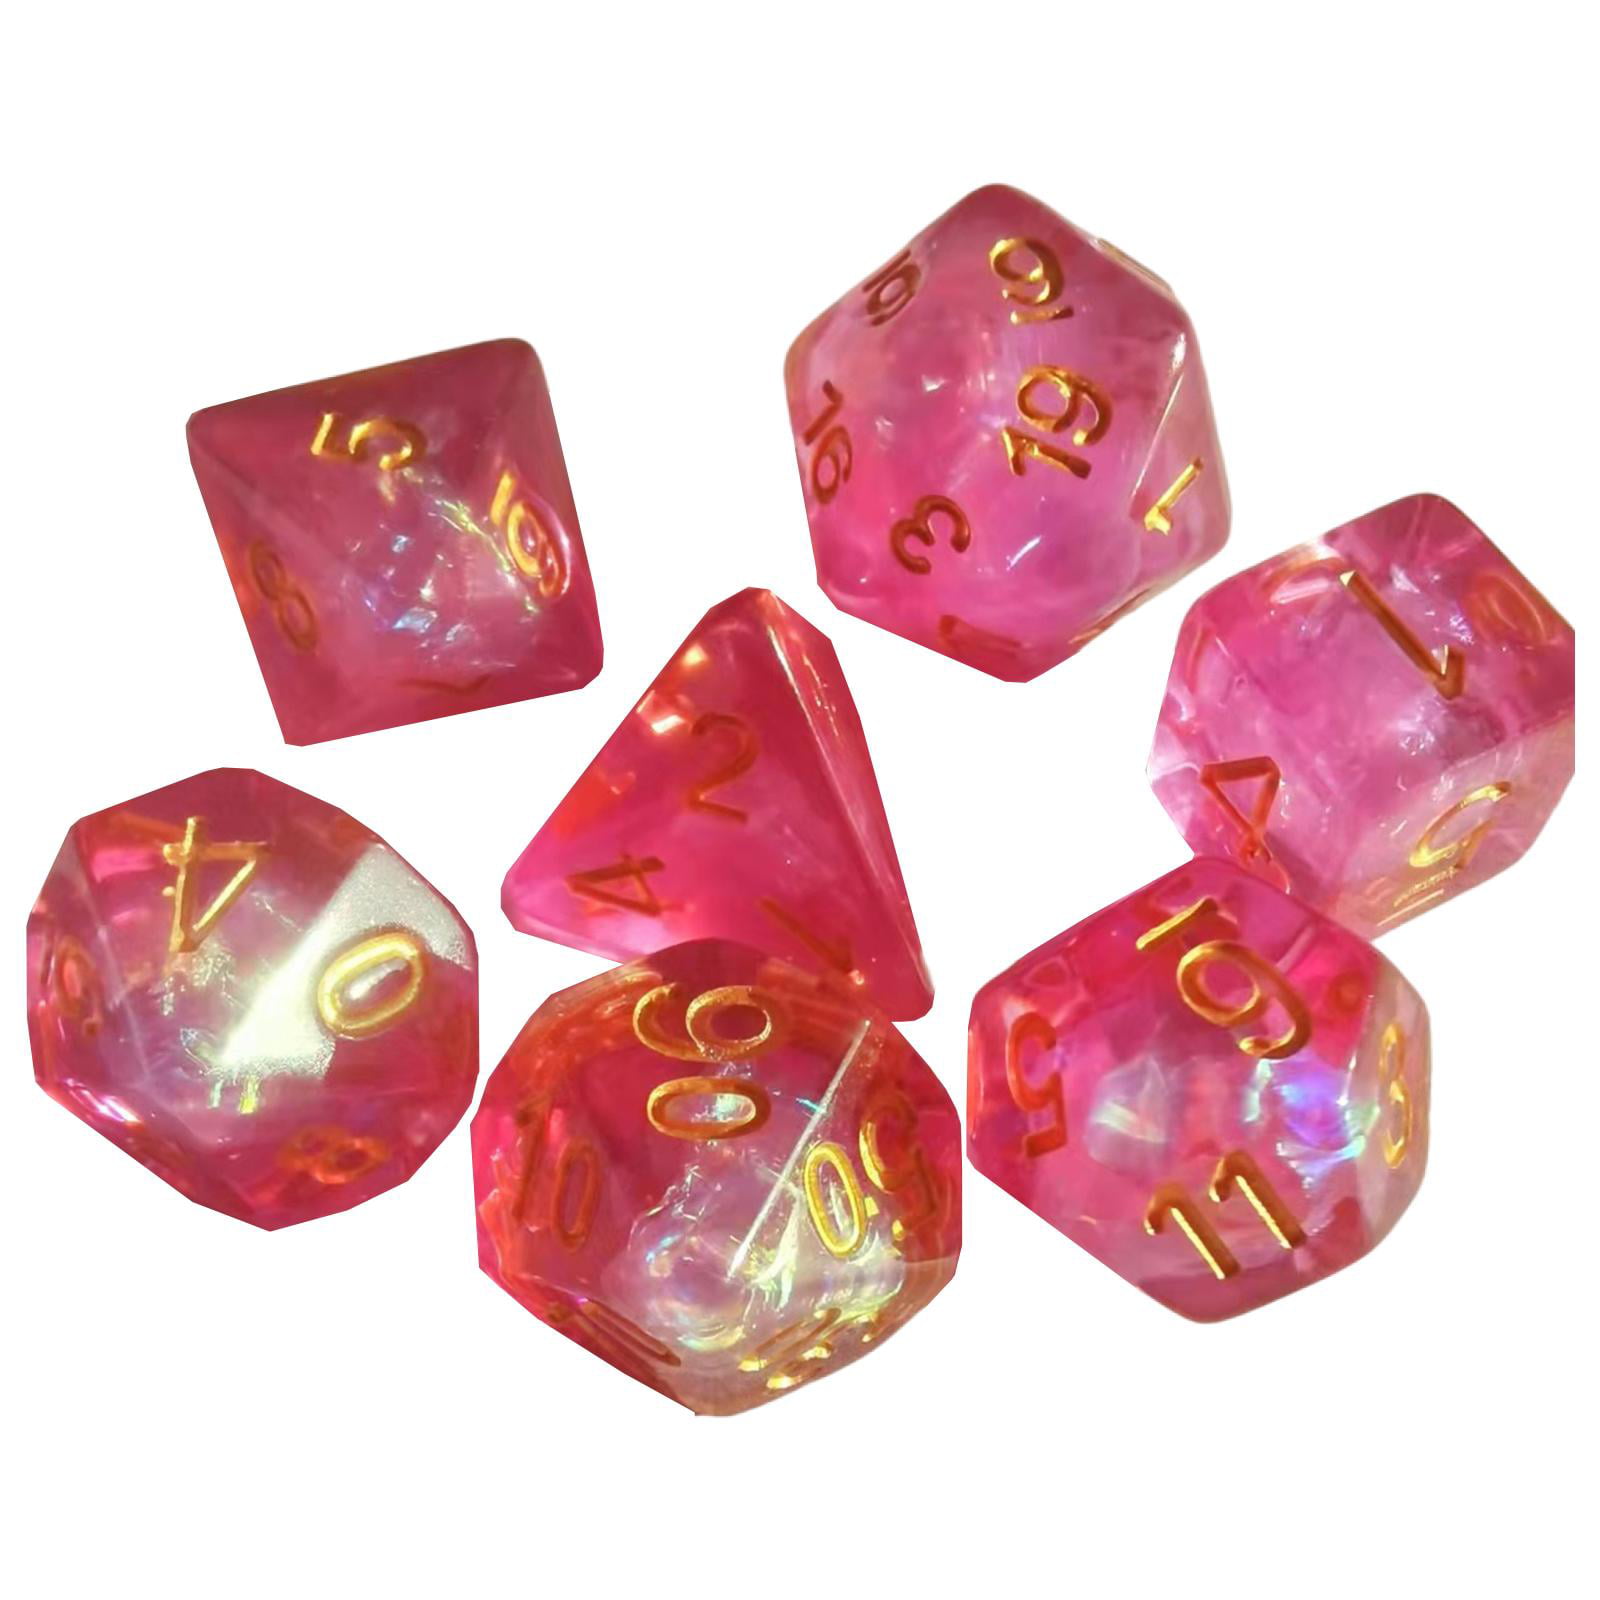 7Pcs Set Resin Polyhedral Dice DND RPG MTG Role Playing Game Purple With Bag 